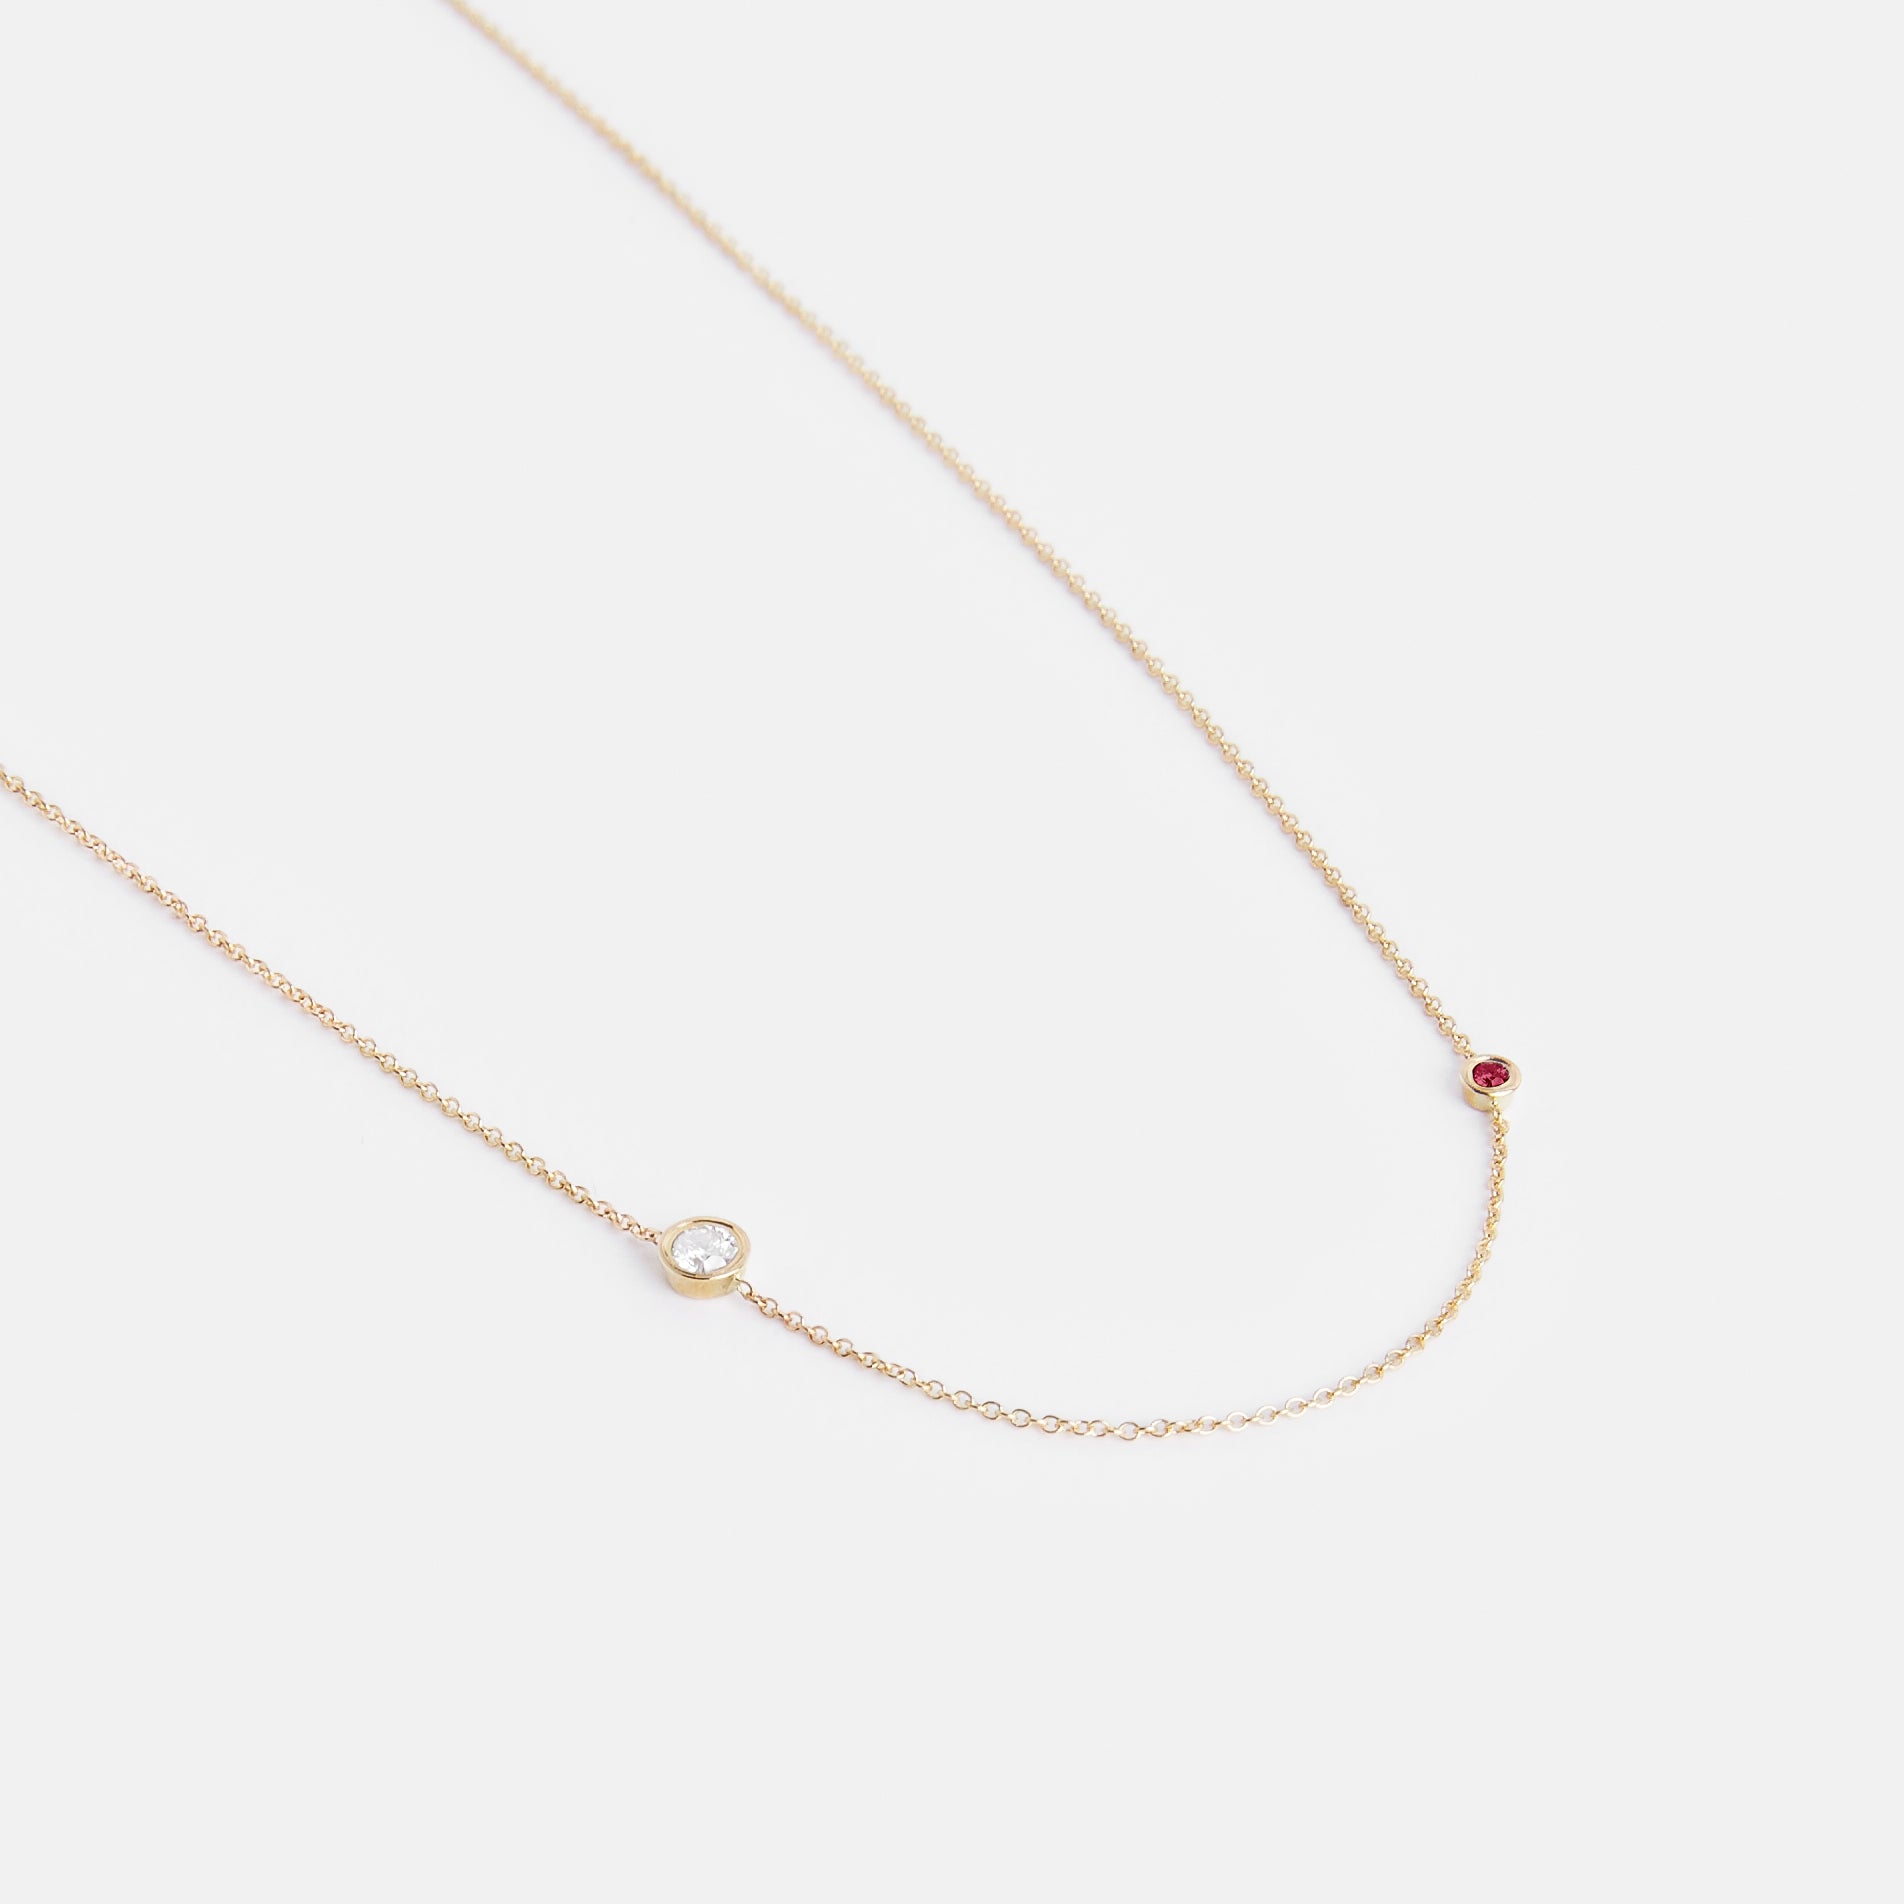 Iba Simple Necklace in 14k Gold set with White Diamond and Ruby By SHW Fine Jewelry NYC